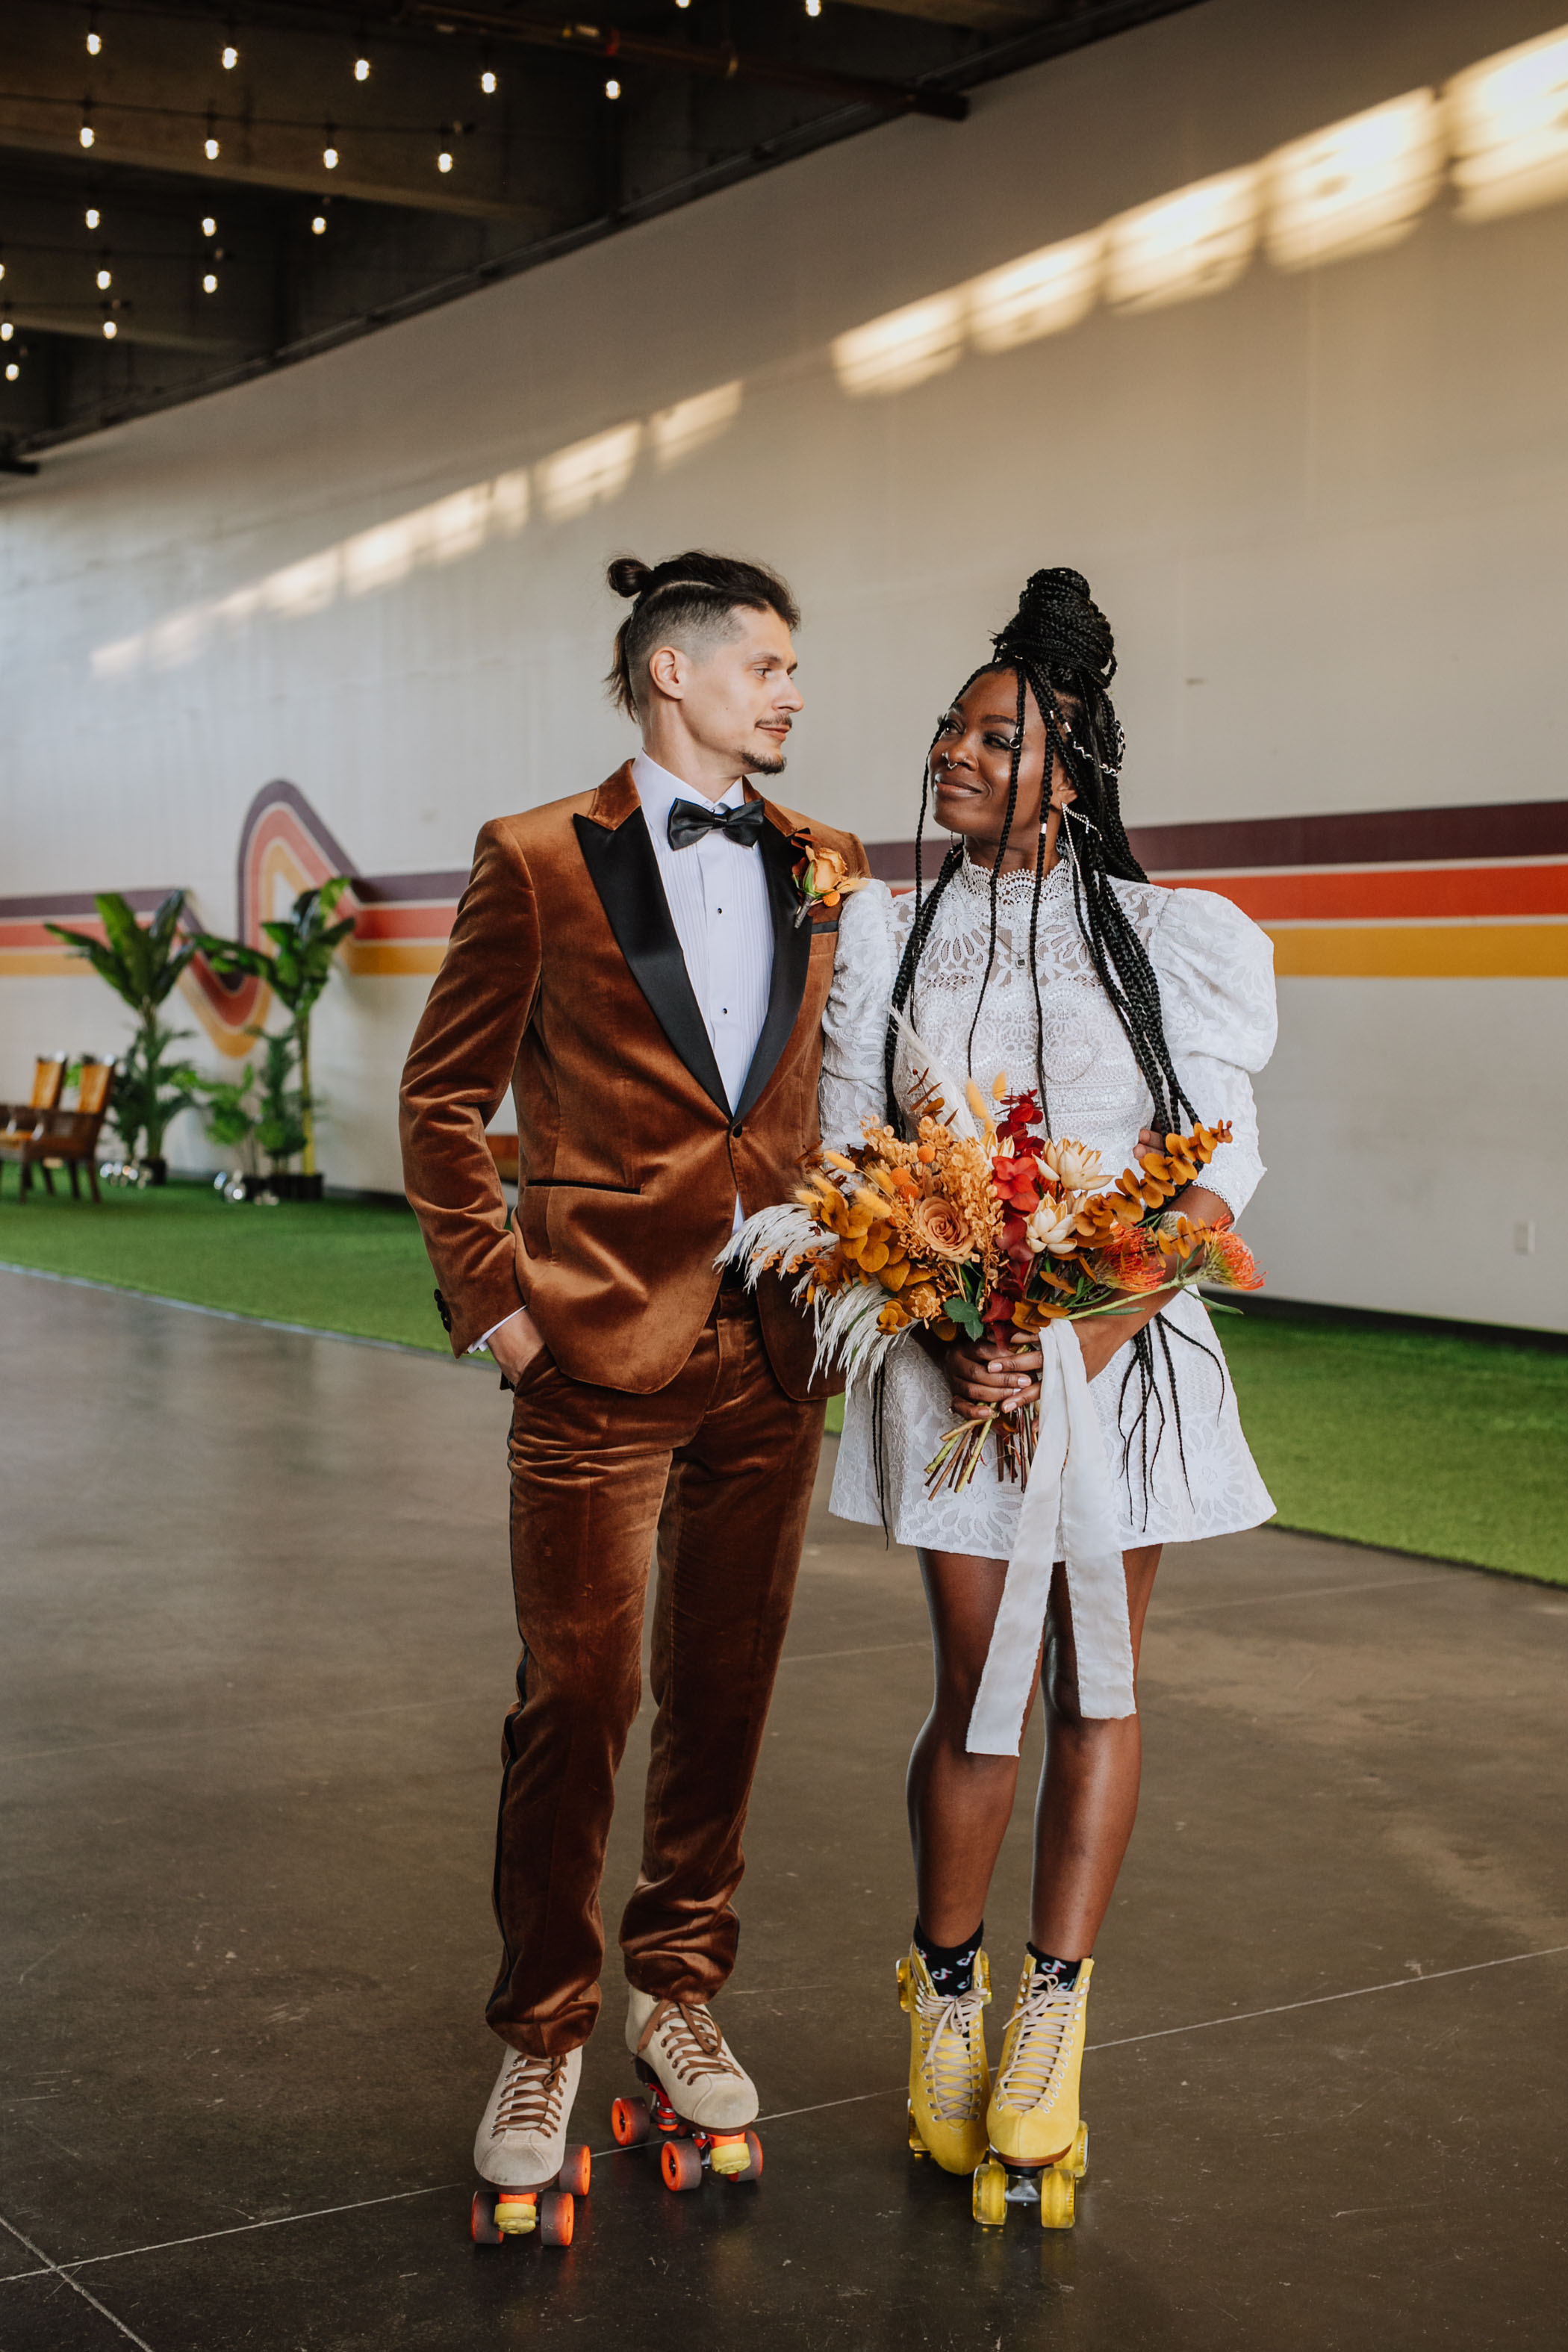 A Roller Rink Wedding Is The Perfect Vibe For Non-Traditional Couples!